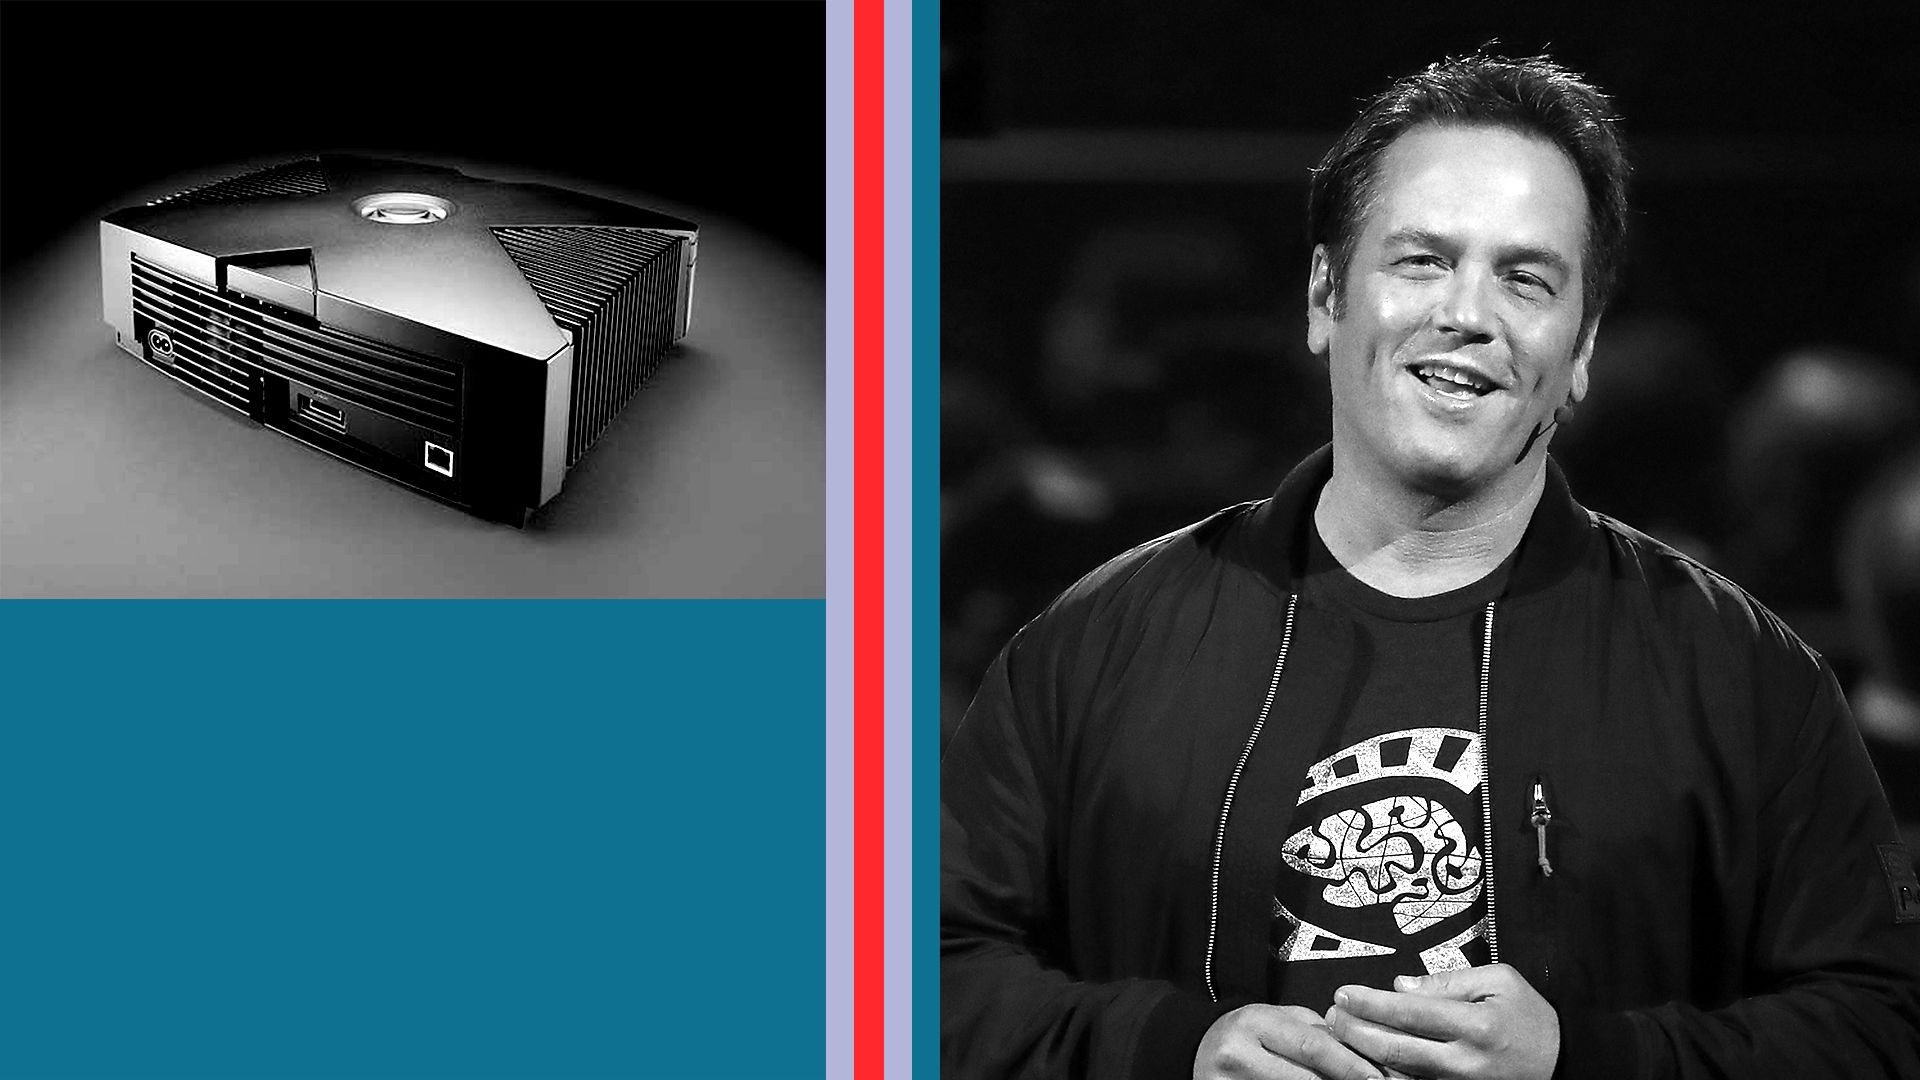 Photos of the original Xbox and Phil Spencer standing on a stage to address Xbox fans